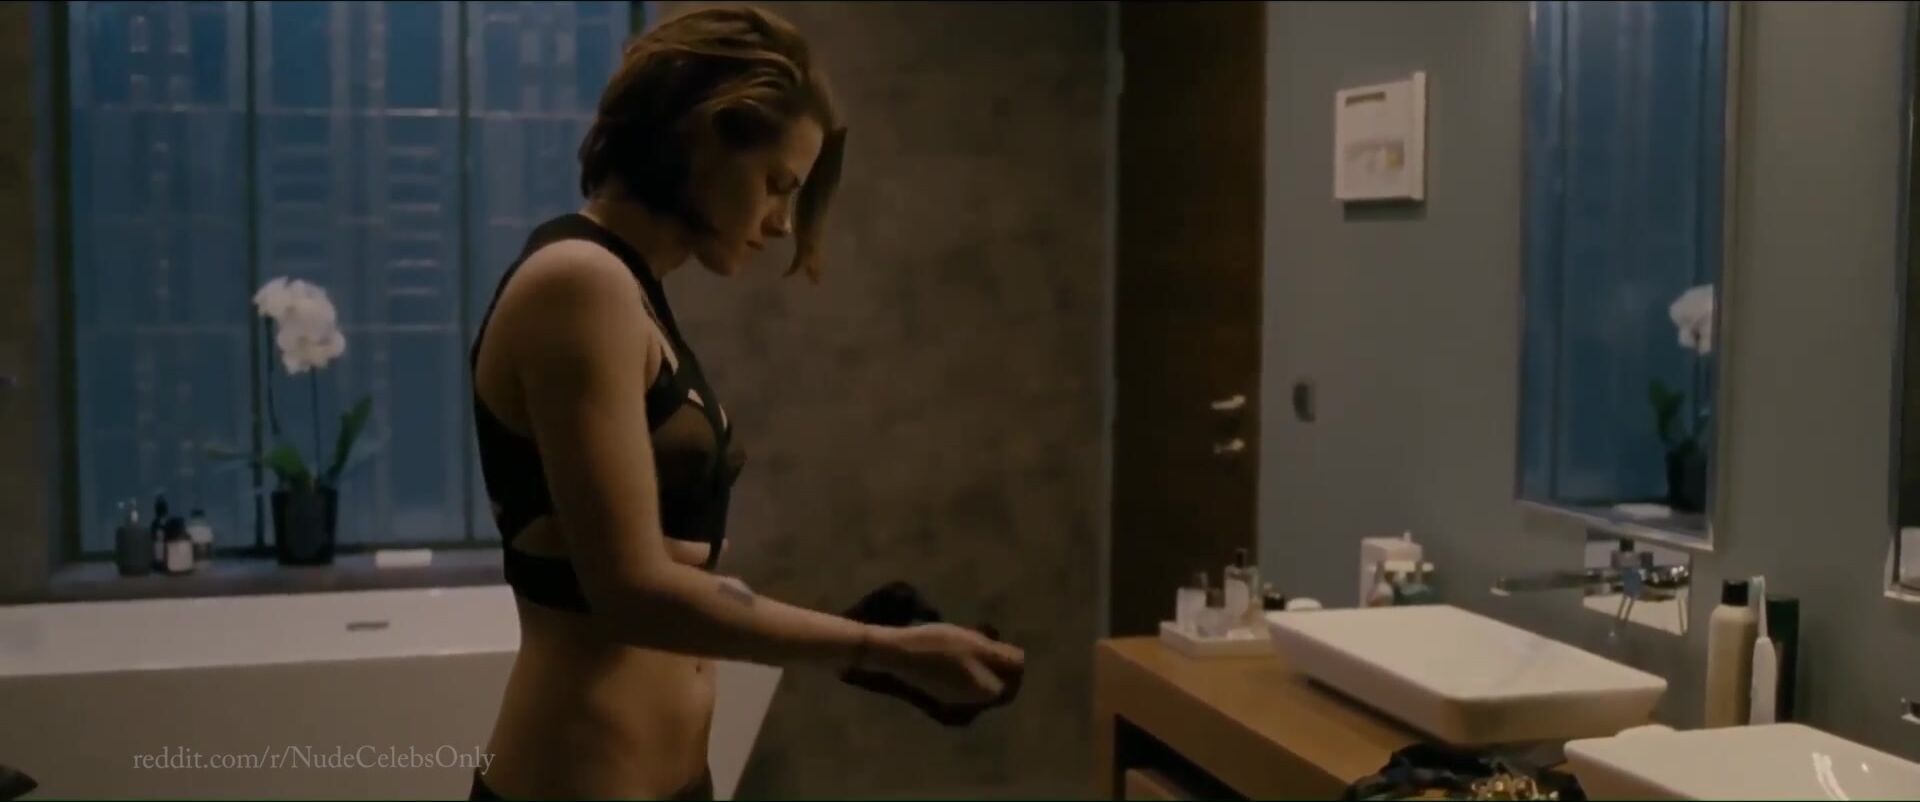 Imlive Celebs video HD compilation of hot movie star Kristen Stewart starring in the nude Blow